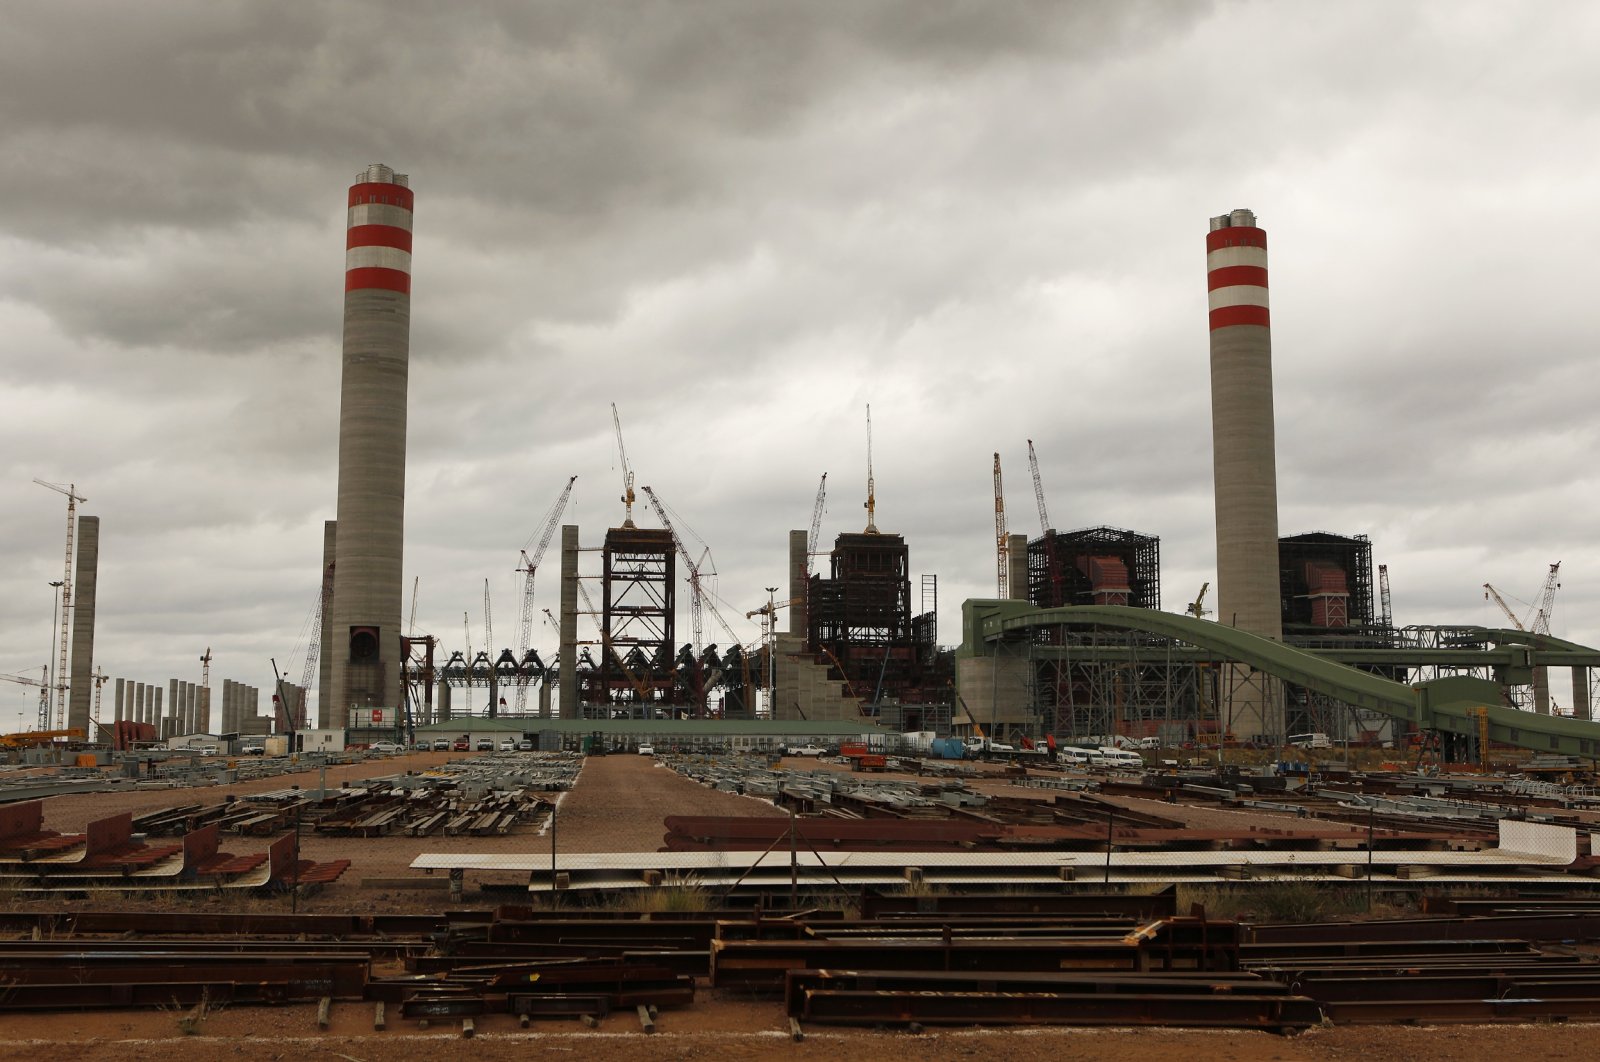 The South African power plant explodes in just one week